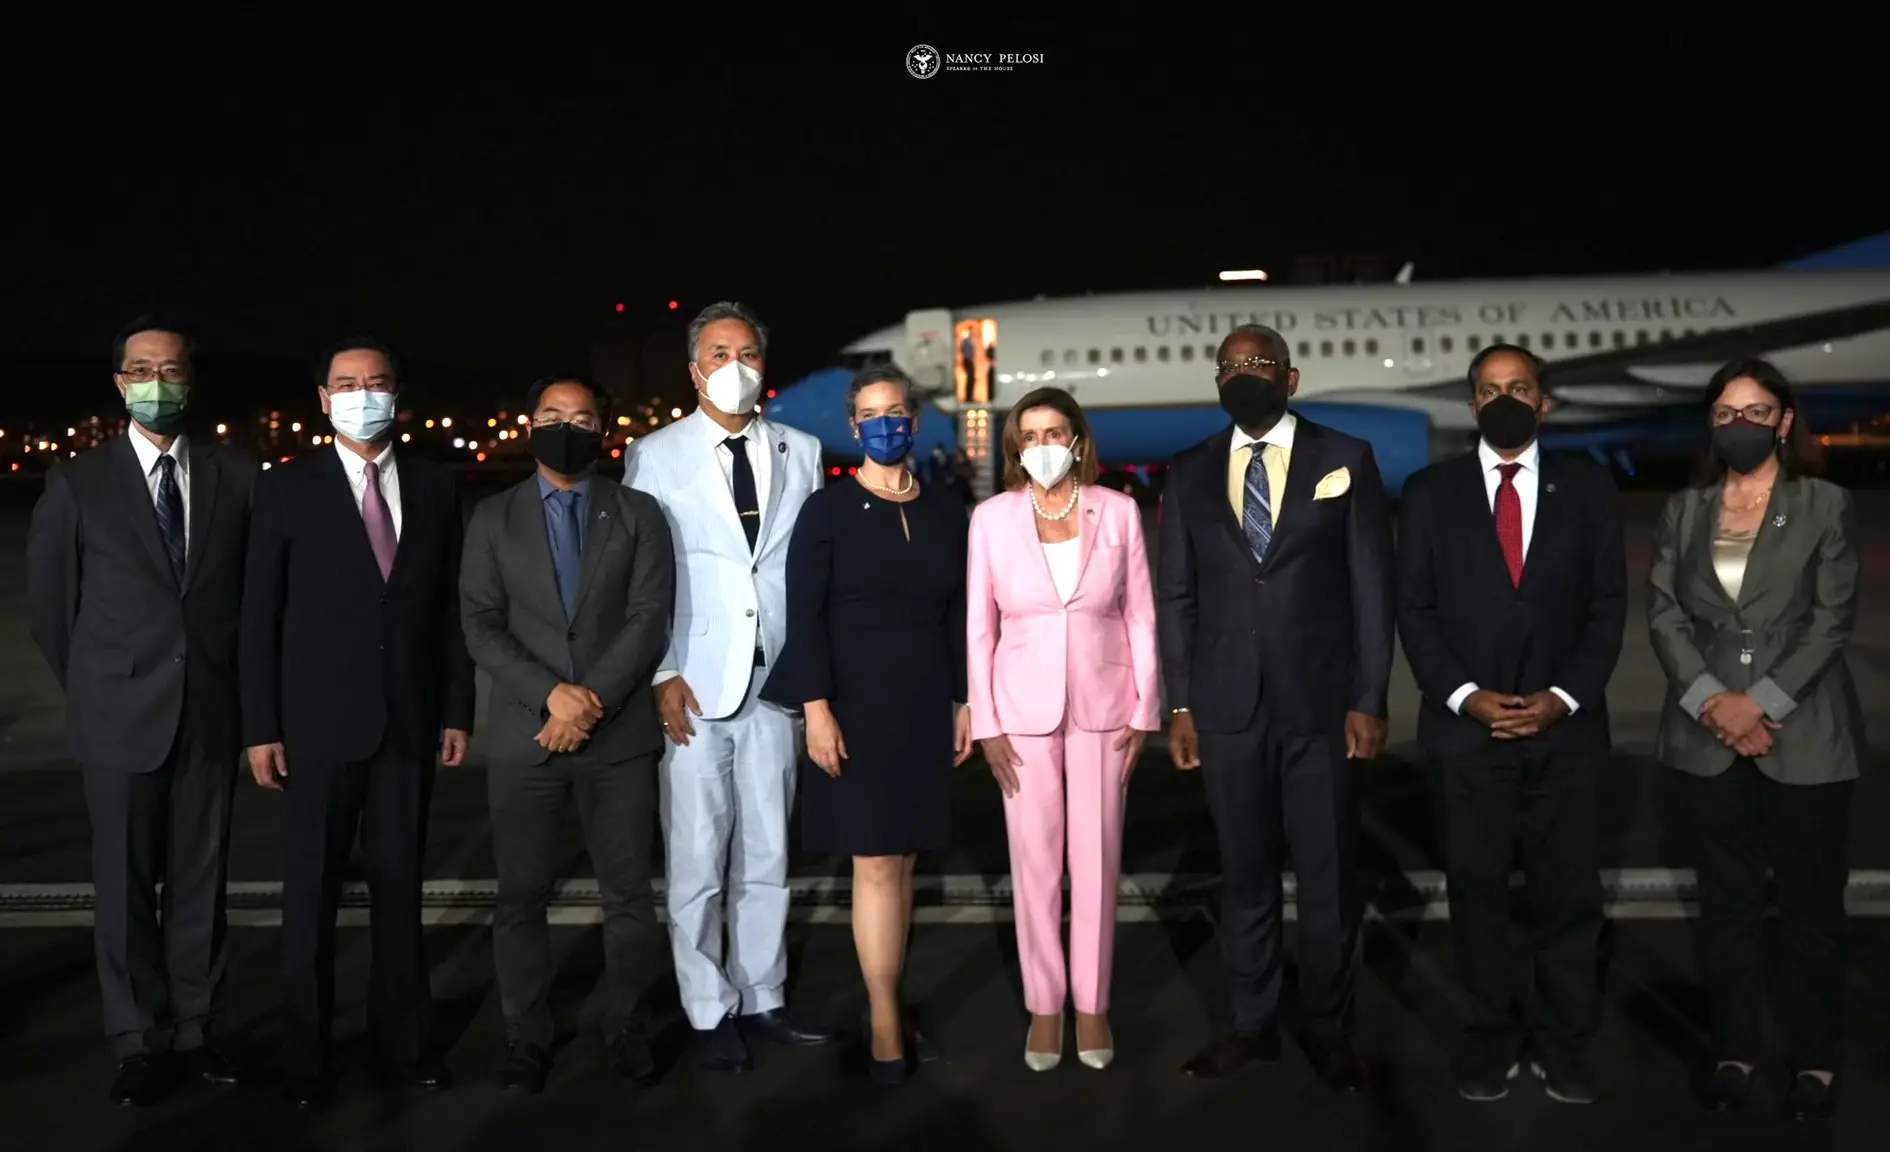 “We come in peace to the region”, says Nancy Pelosi in Taiwan as 21 Chinese jets enter Taipei’s Air Defence Zone